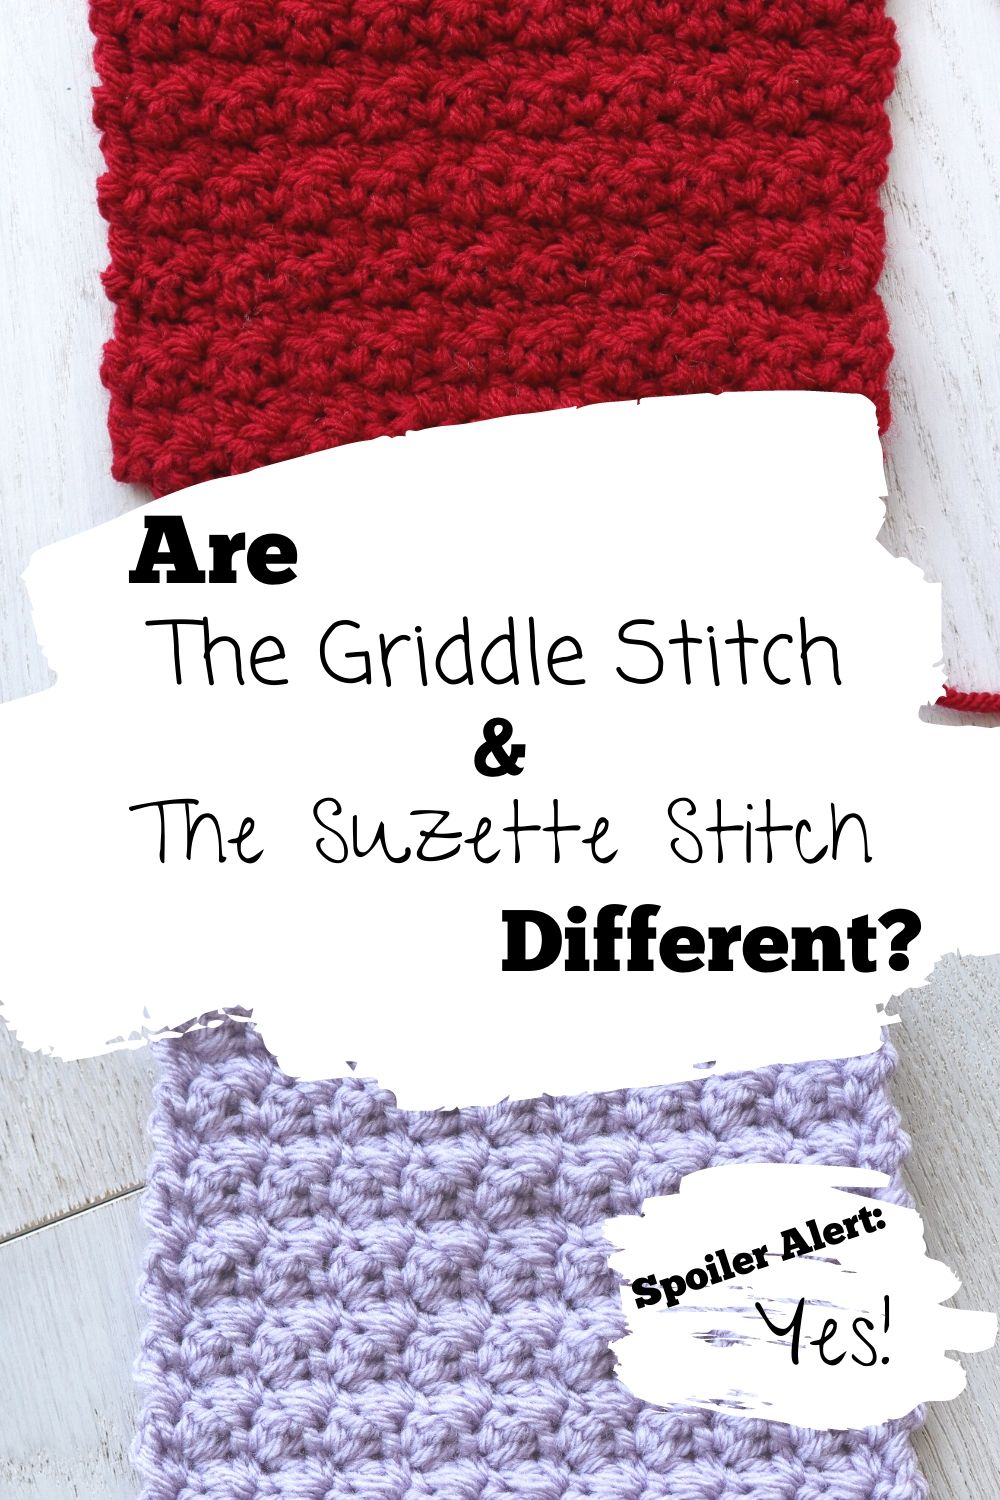 Are the griddle stitch and the Suzette stitch different? Spoiler alert: yes!